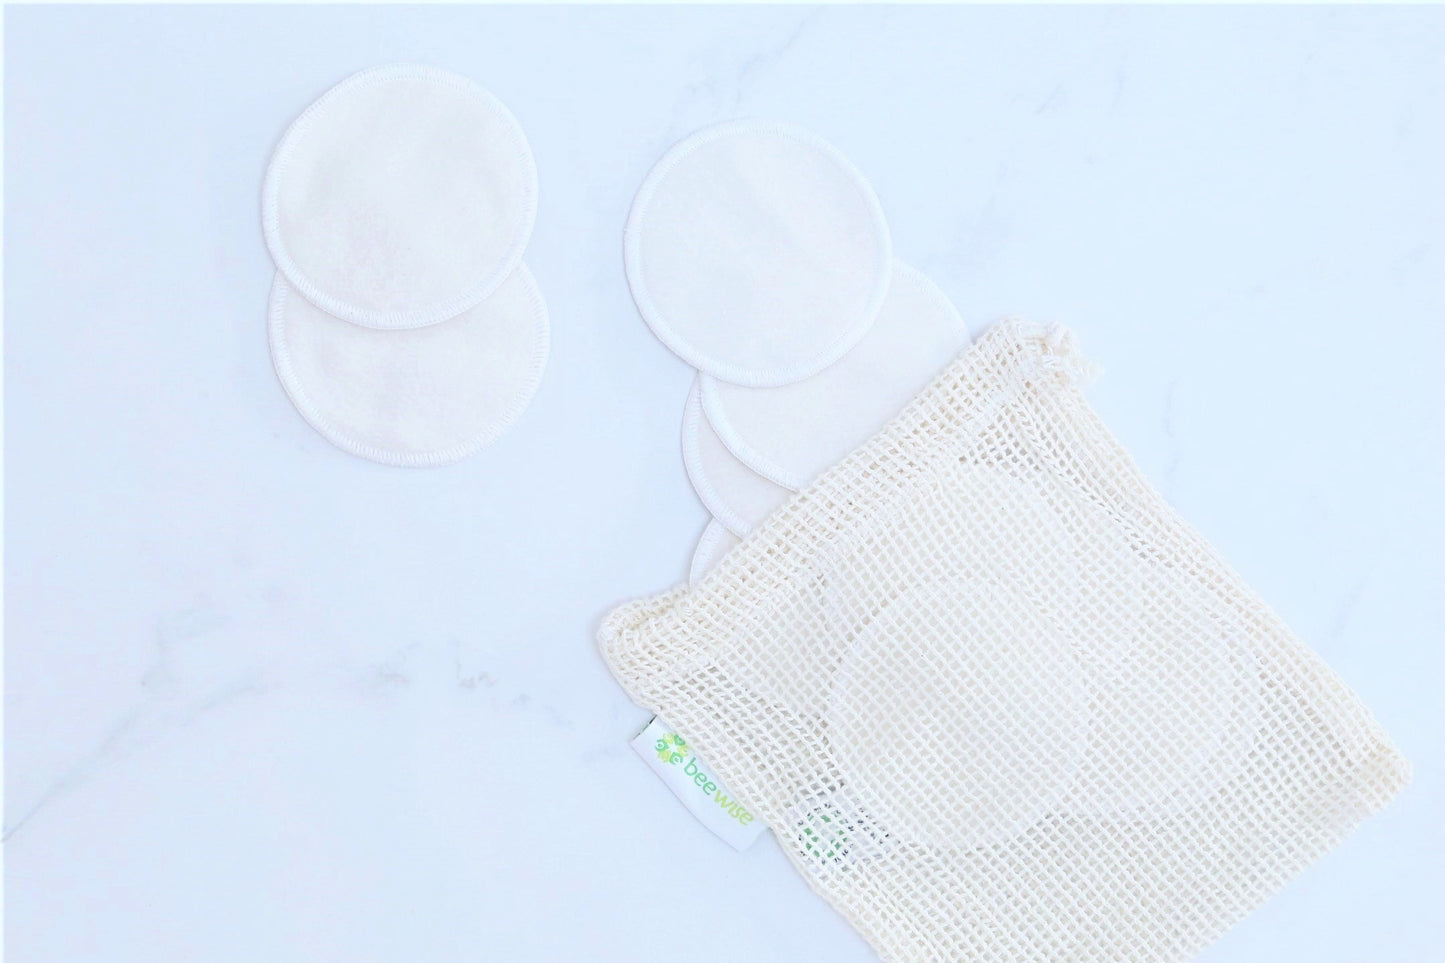 Reusable Makeup Remover Pads inside the mesh bag in the bathroom